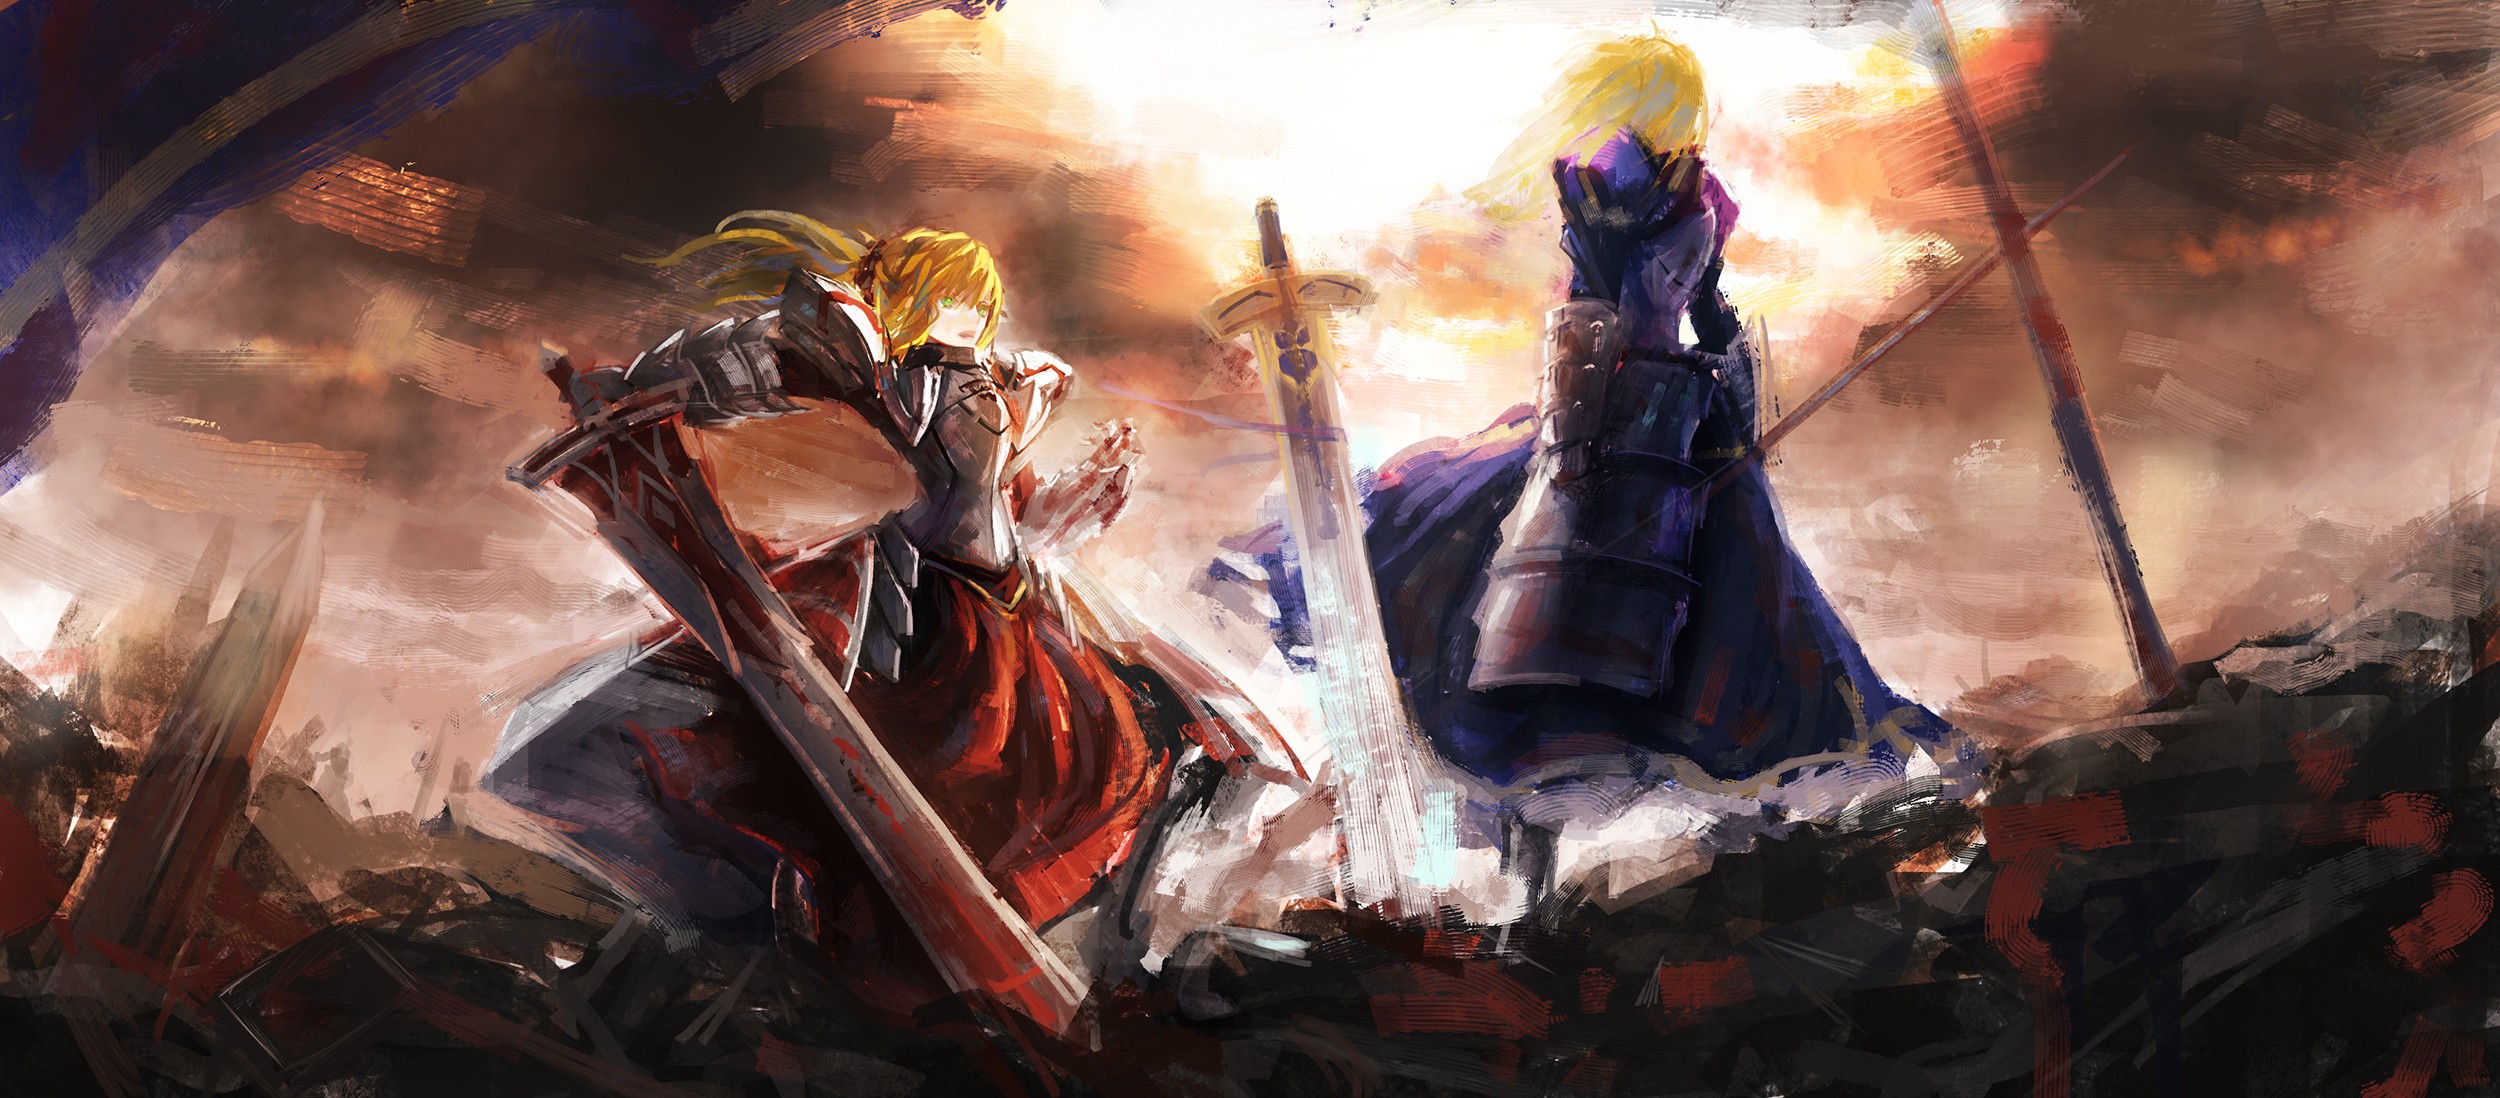 Saber Fate Stay Night Fate Apocrypha Fate Series Saber Of Red Mordred Fate Apocrypha Anime Girls 2500x1098